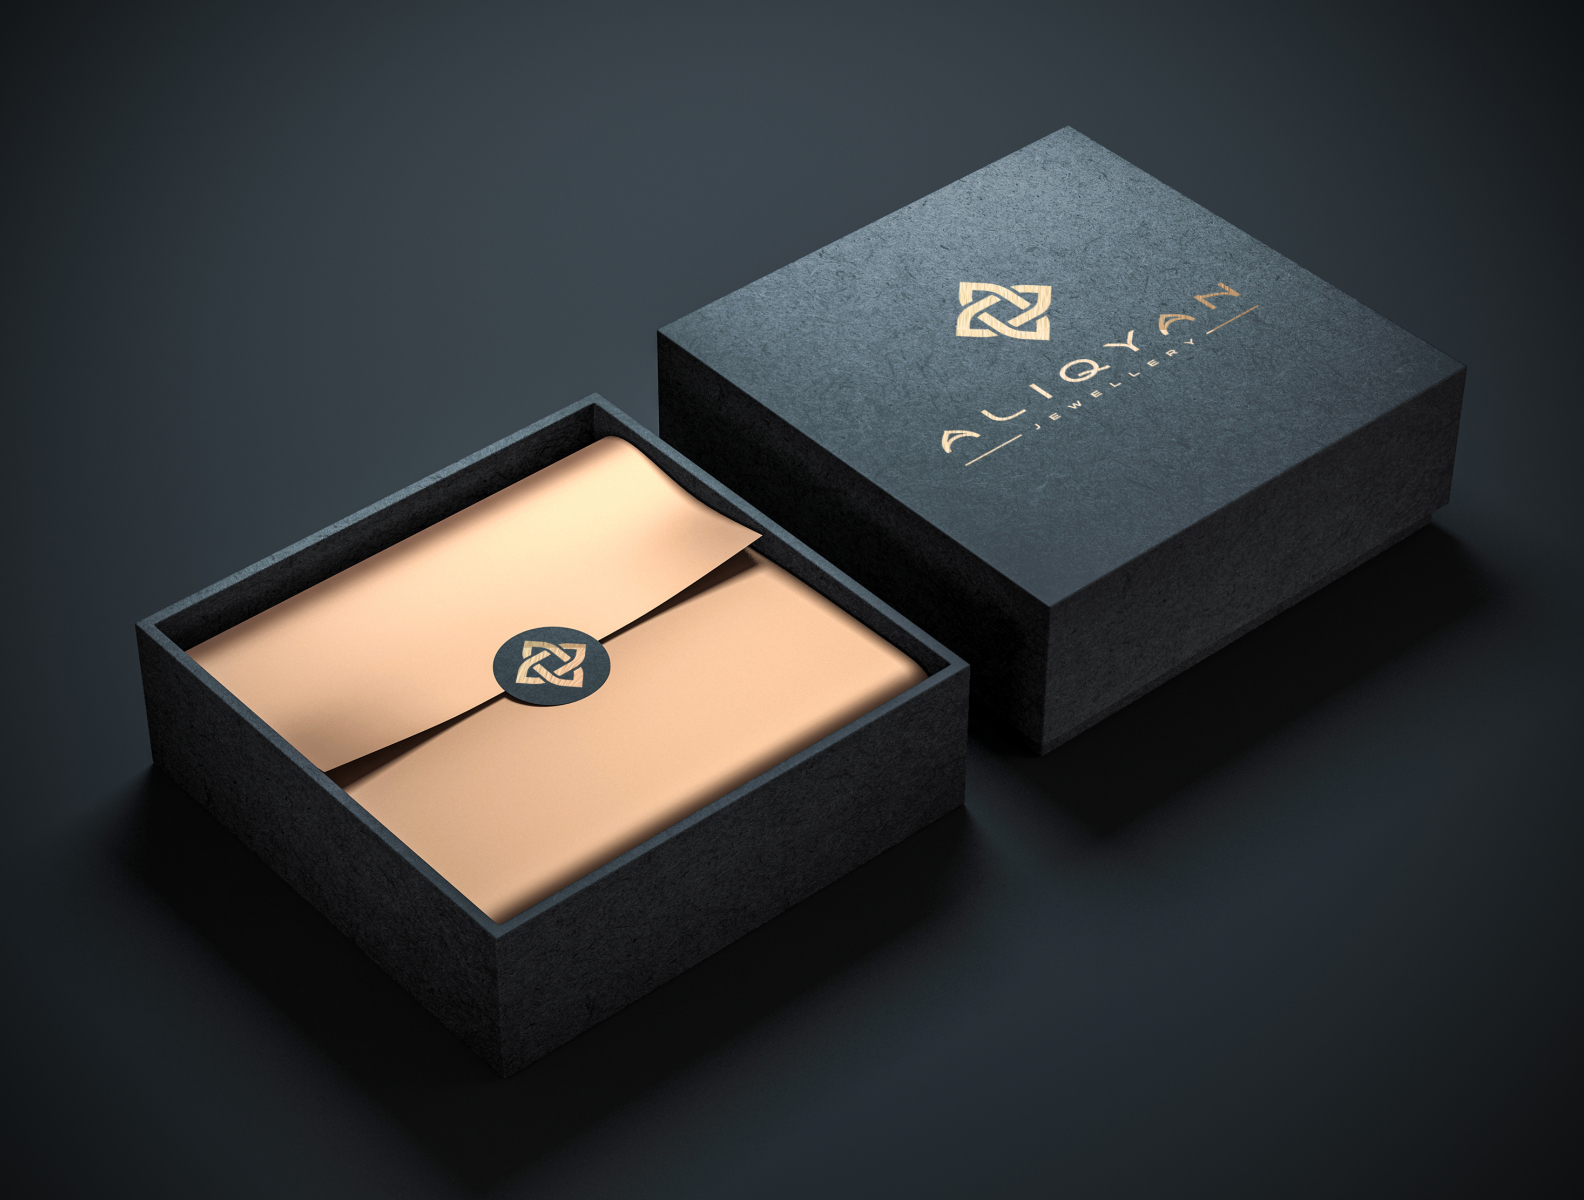 Download Luxury Box Mockup ALIQYAN Packaging Design by PANTER on Dribbble